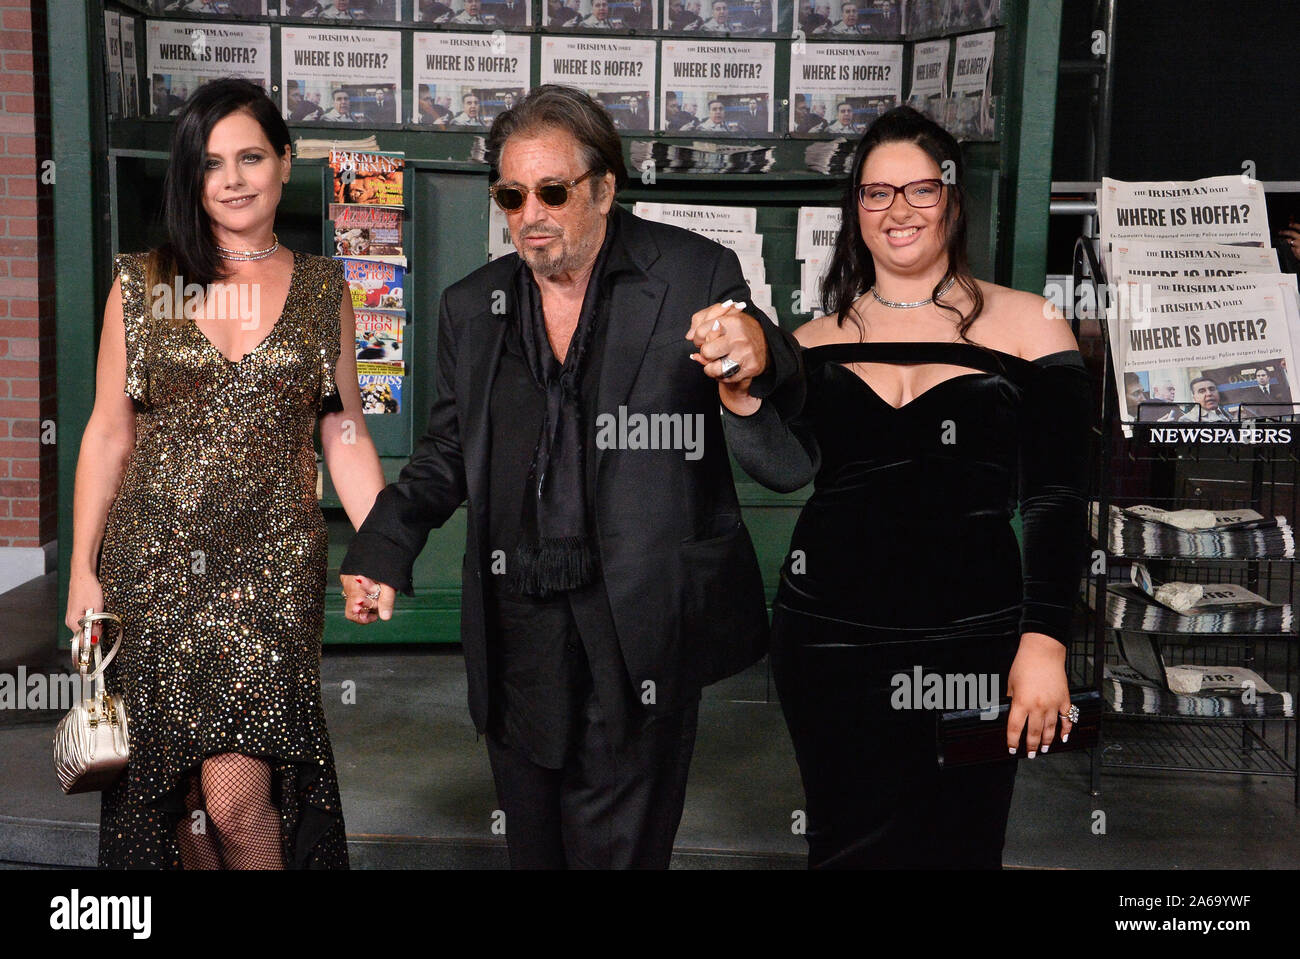 Los Angeles, United States. 24th Oct, 2019. Cast member Al Pacino and Israeli actress Meital Dohan and his daughter Olivia Pacino (R) attend the premiere of the historical crime thriller 'The Irishman' at the TCL Chinese Theatre in the Hollywood section of Los Angeles on Thursday, October 24, 2019. Storyline: Frank 'The Irishman' Sheeran is a man with a lot on his mind. The former labor union high official and hitman, learned to kill serving in Italy during the Second World War. Credit: UPI/Alamy Live News Stock Photo